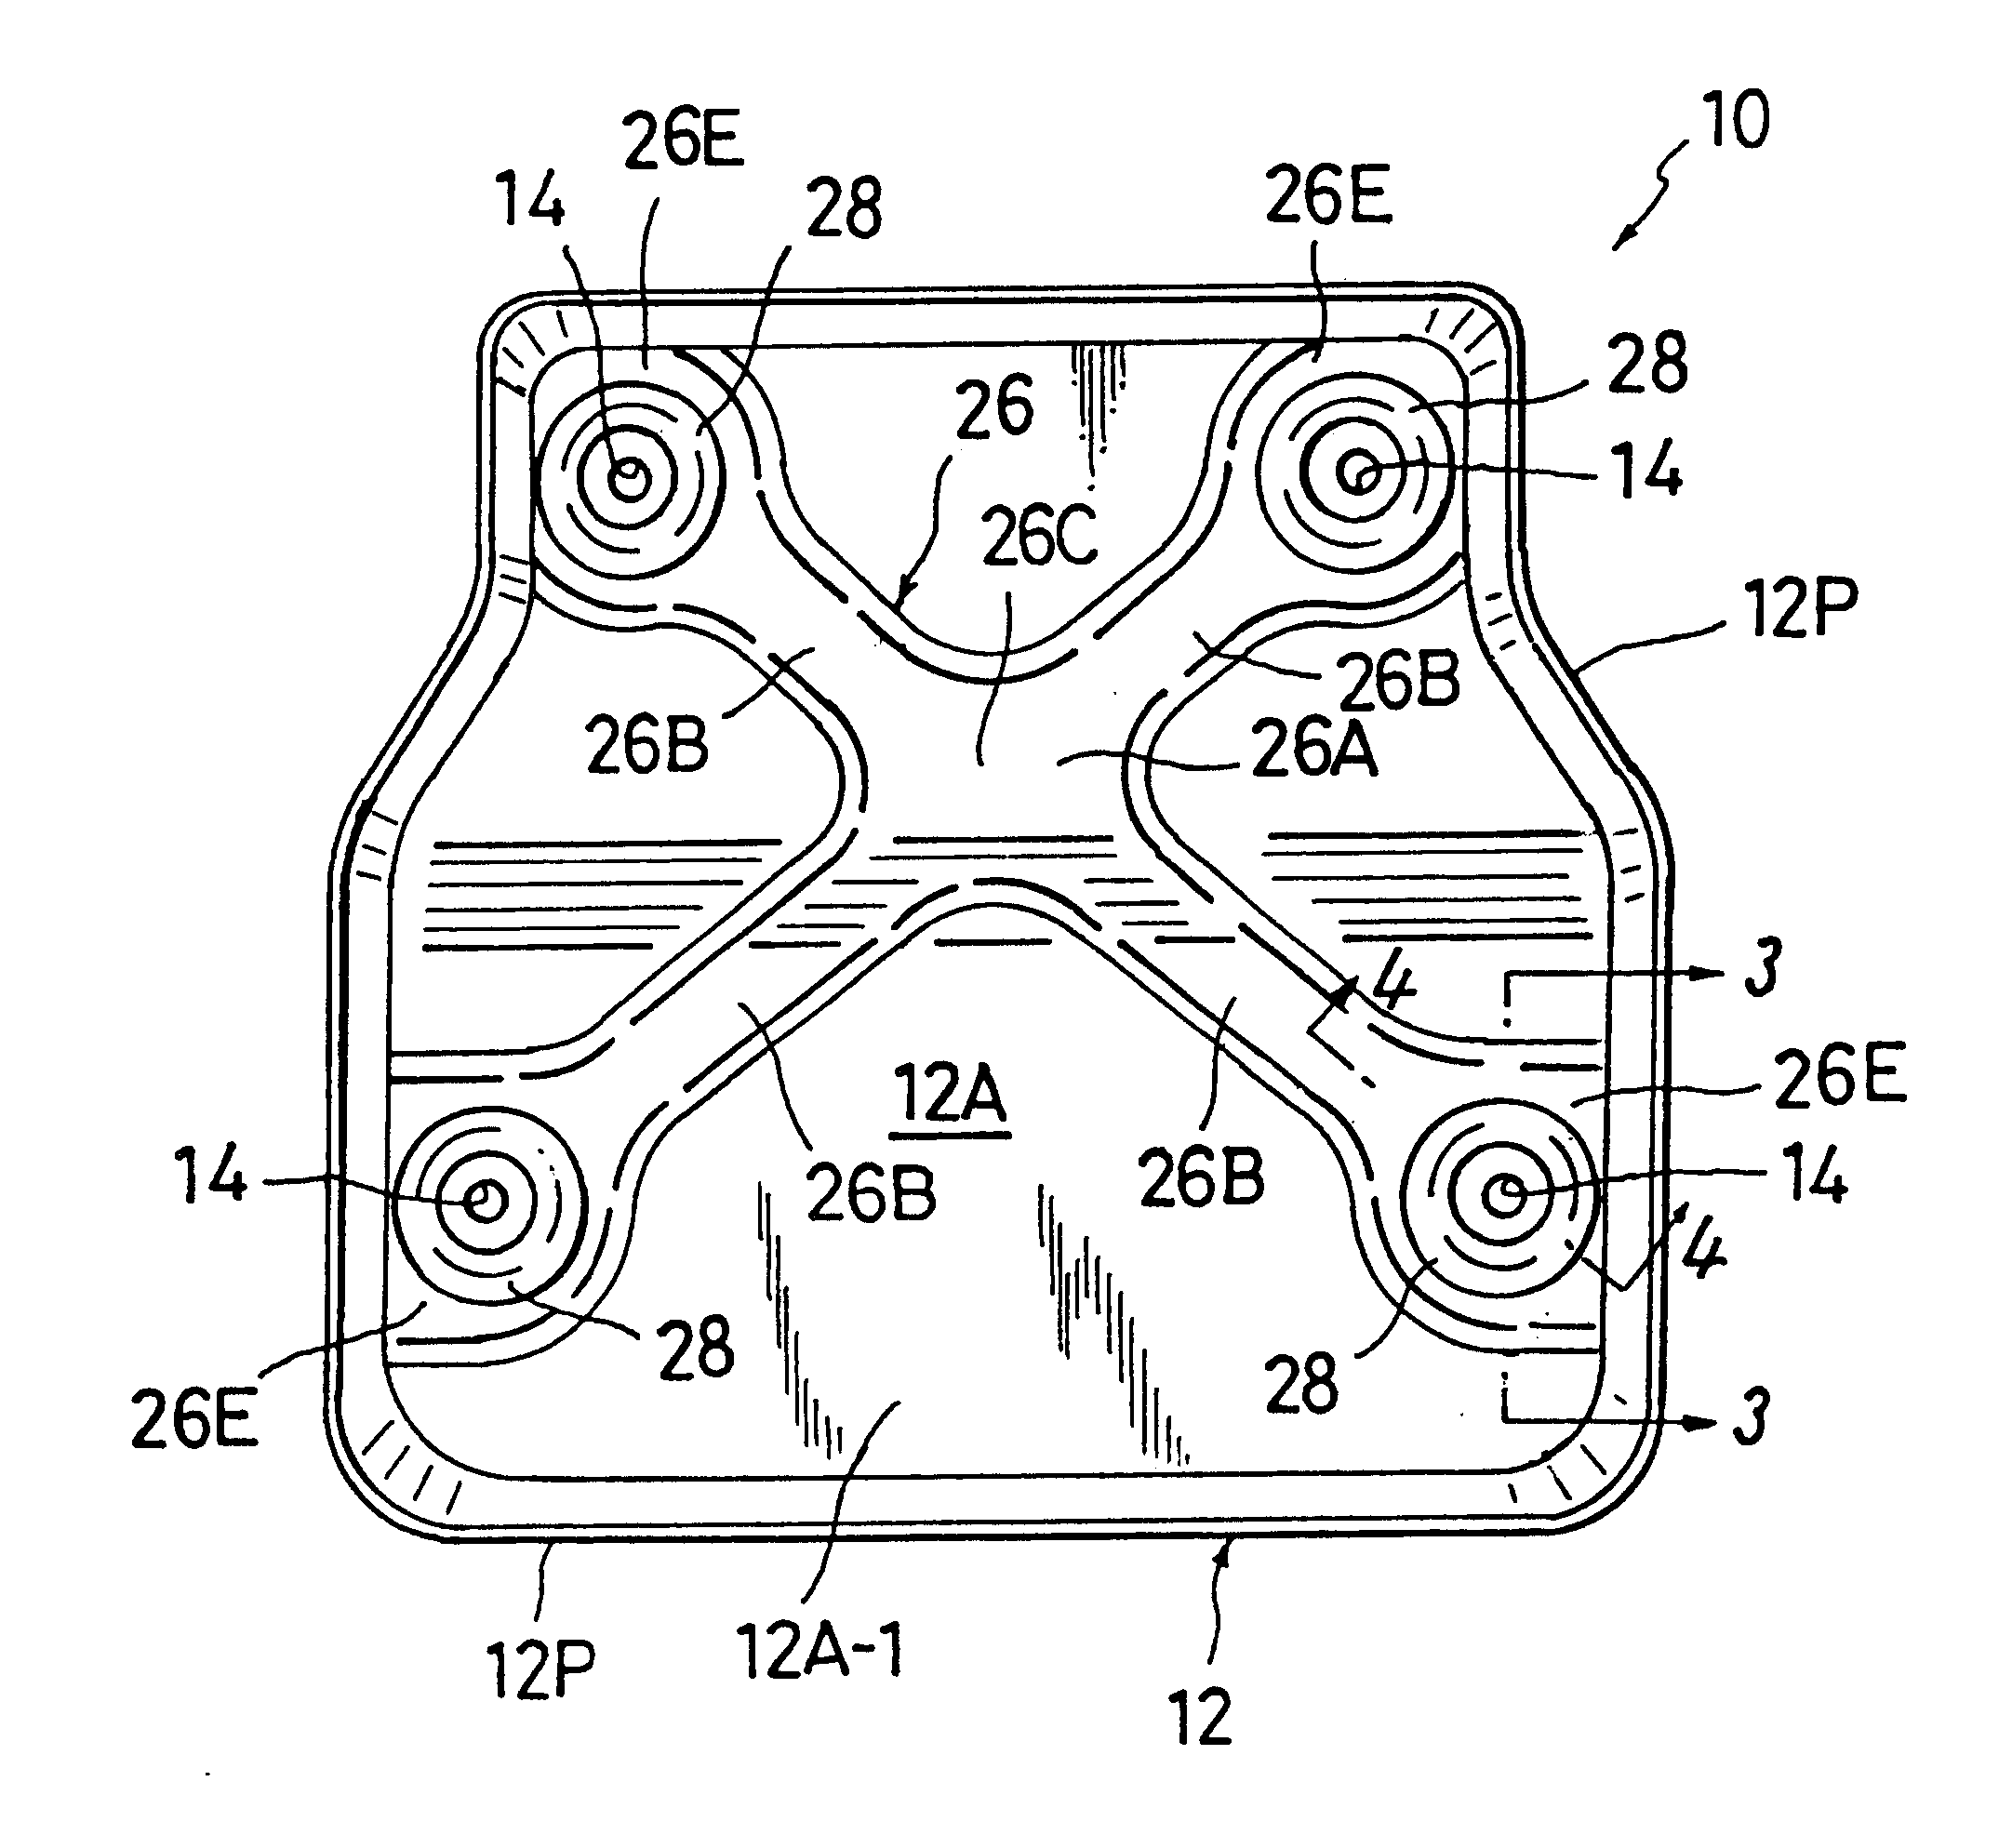 Pan frame structure of seat cushion of a vehicle seat